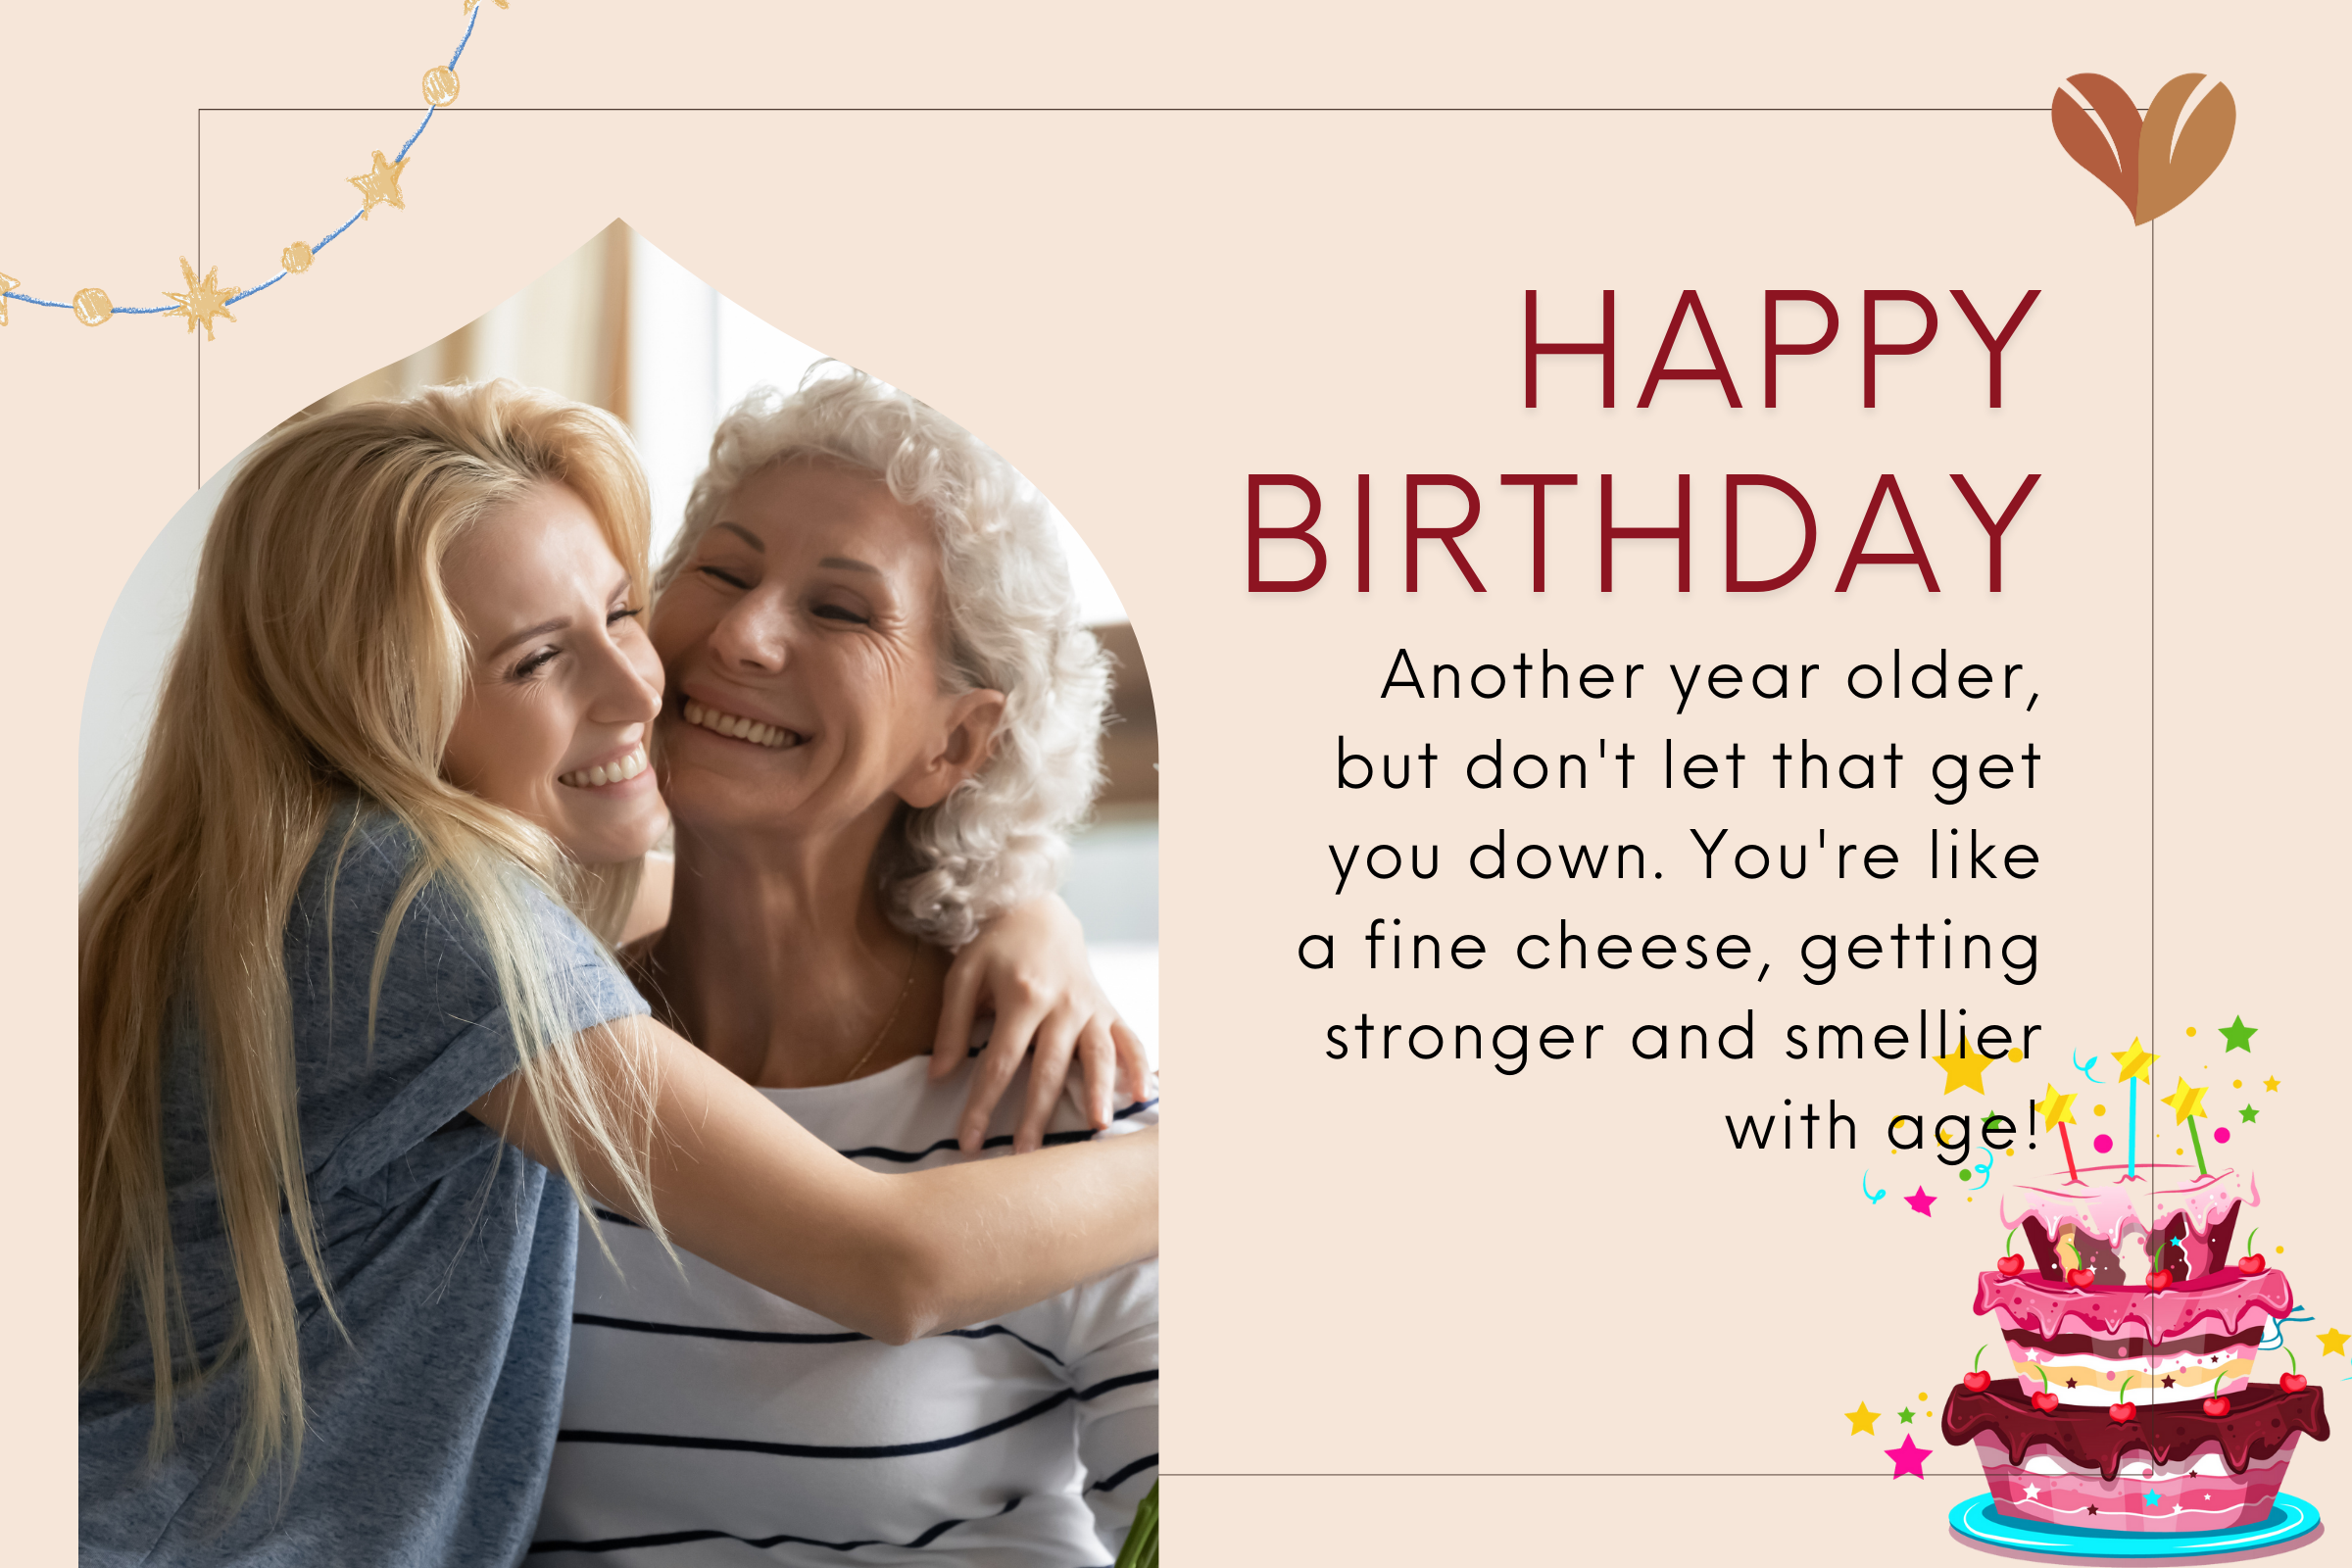 With heartfelt birthday card wishes, we celebrate the wonderful person you are: Birthday Card Wishes